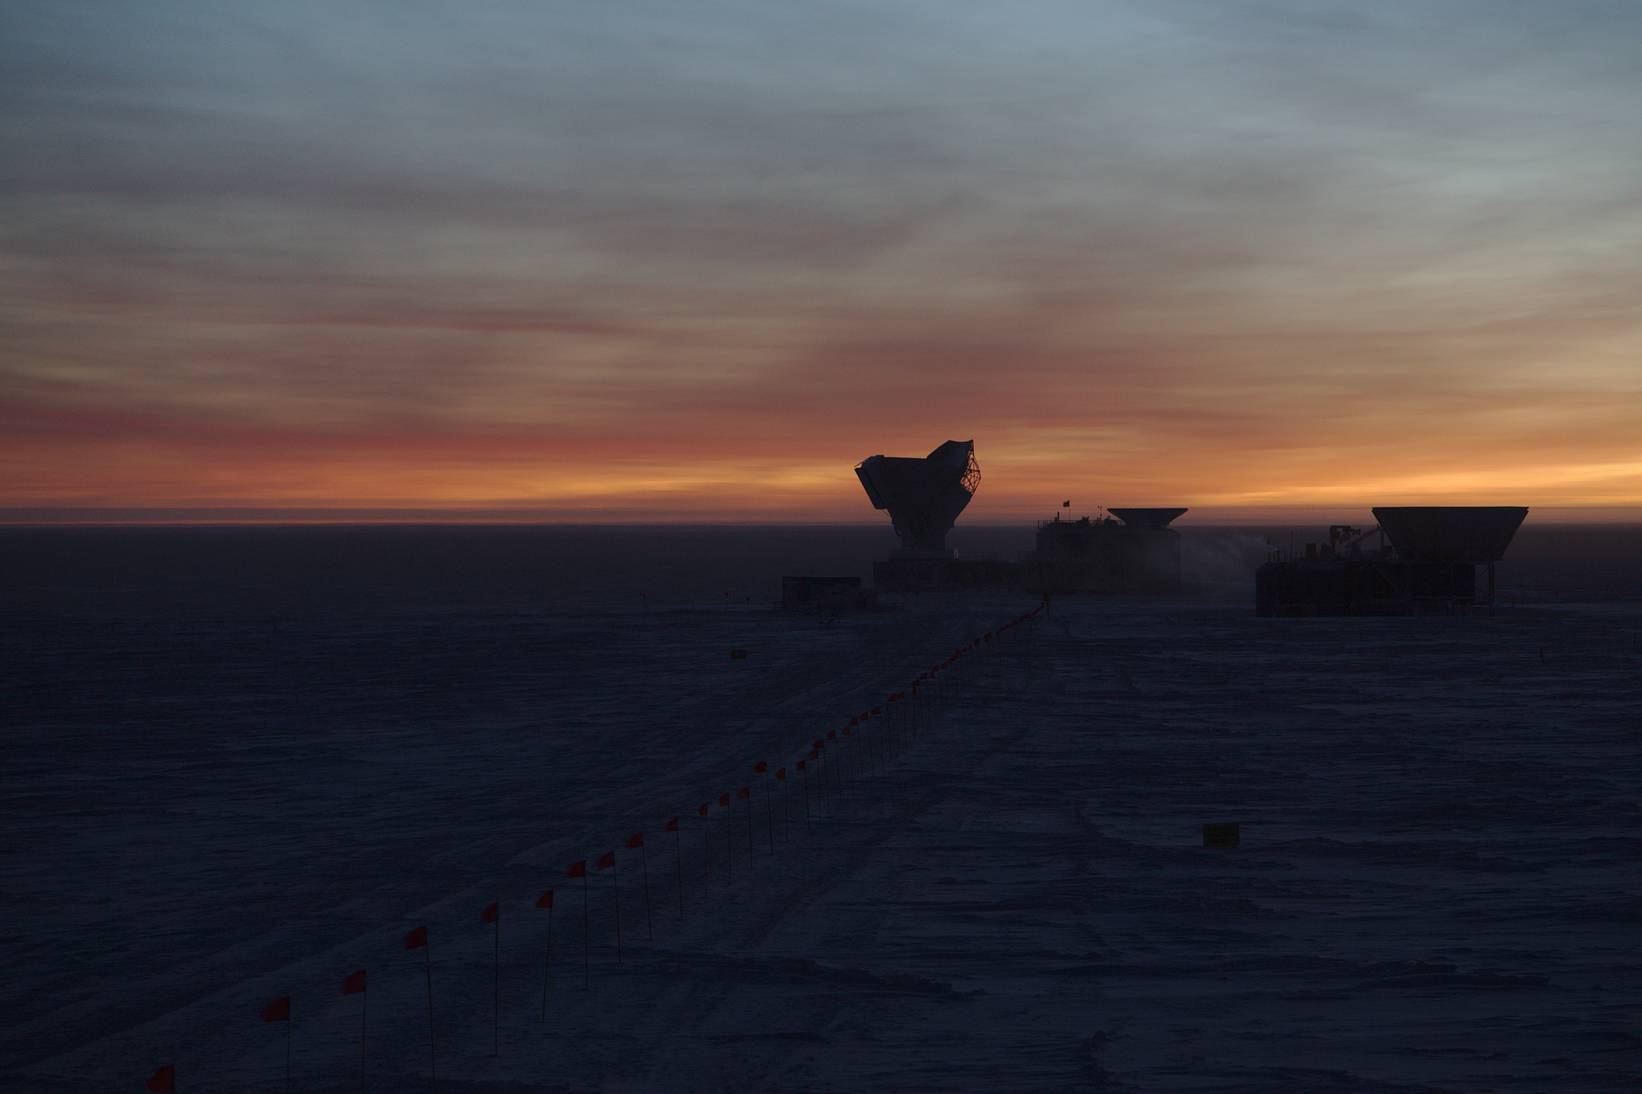 April 2017: The South Pole Telescope during EHT observations, 12 hours after the previous telescope picture. The last glimpses of the Sun behind the horizon cause the clouds in the sky to light up in hauntingly beautiful colours.